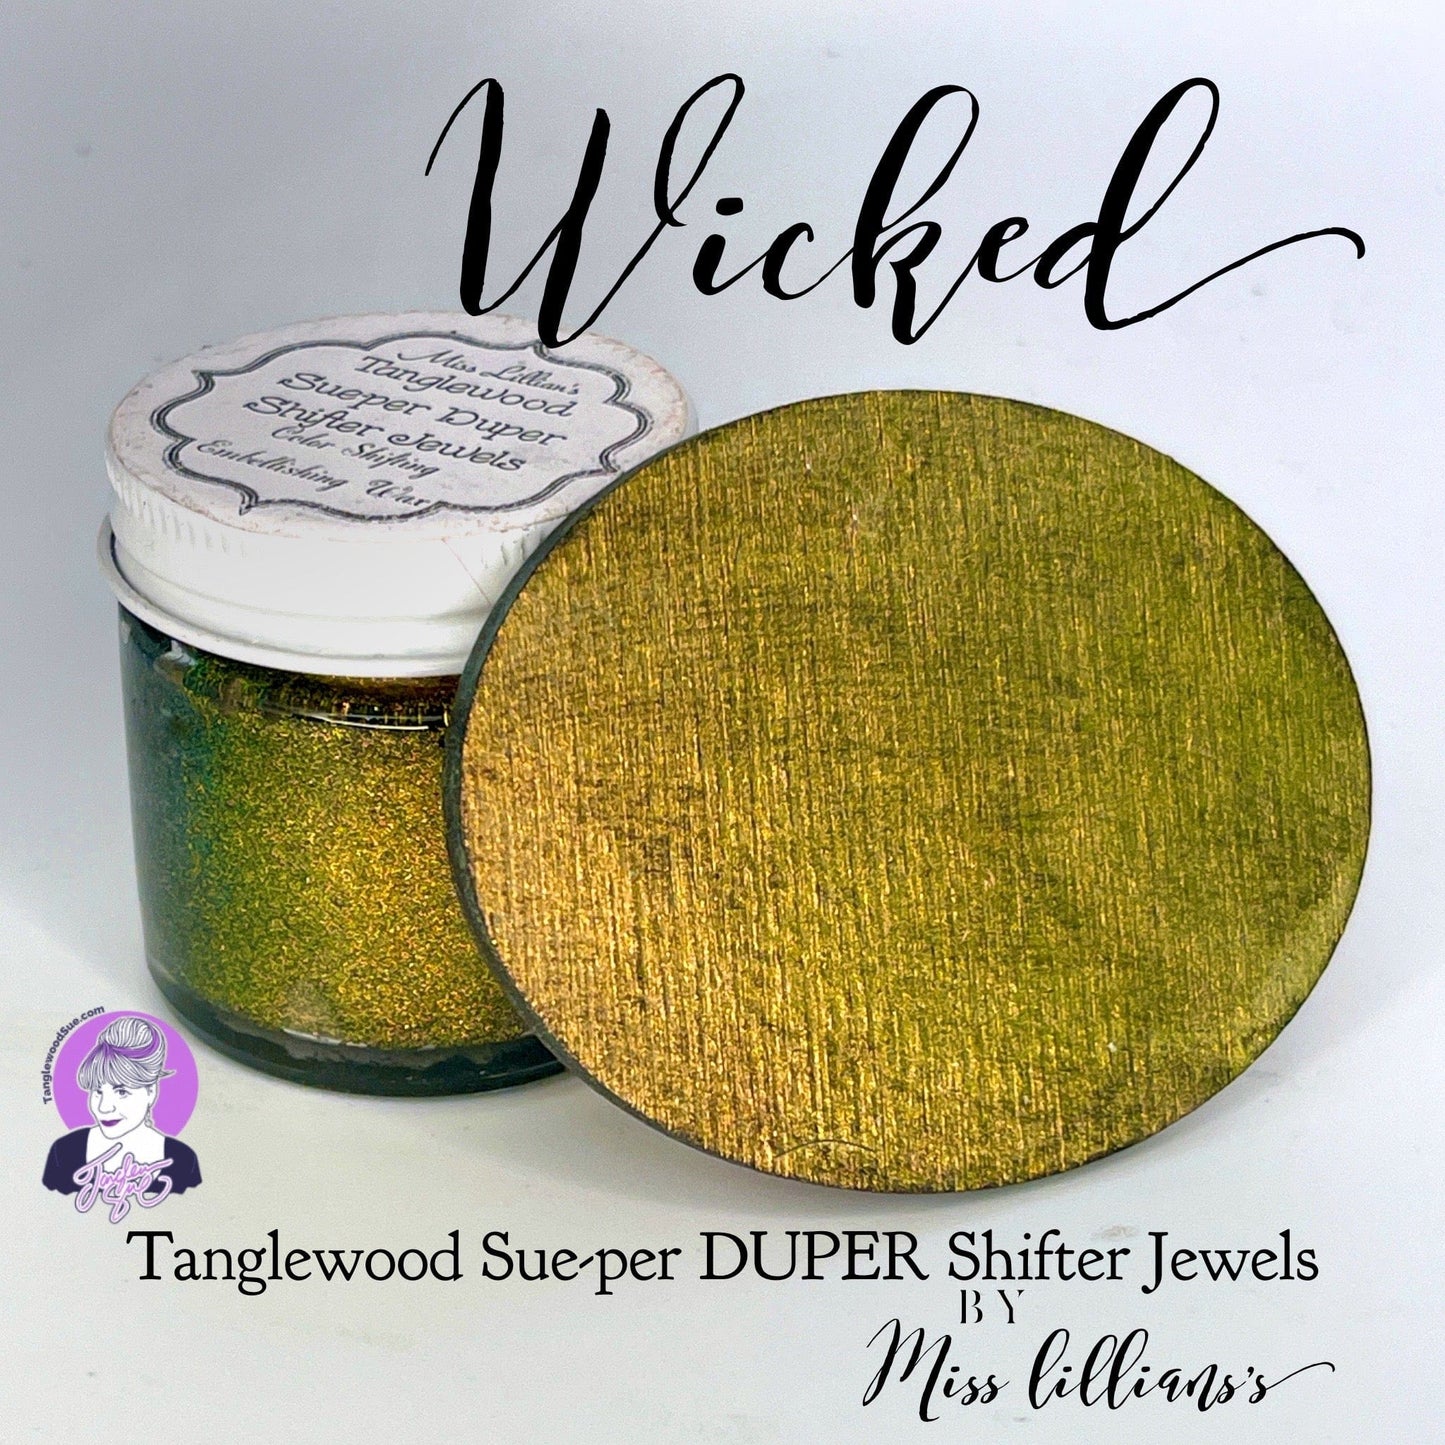 Tanglewood SuePer Shifters Craft Paint, Ink & Glaze WICKED-Tanglewood Sue-per DUPER Shifter Jewels